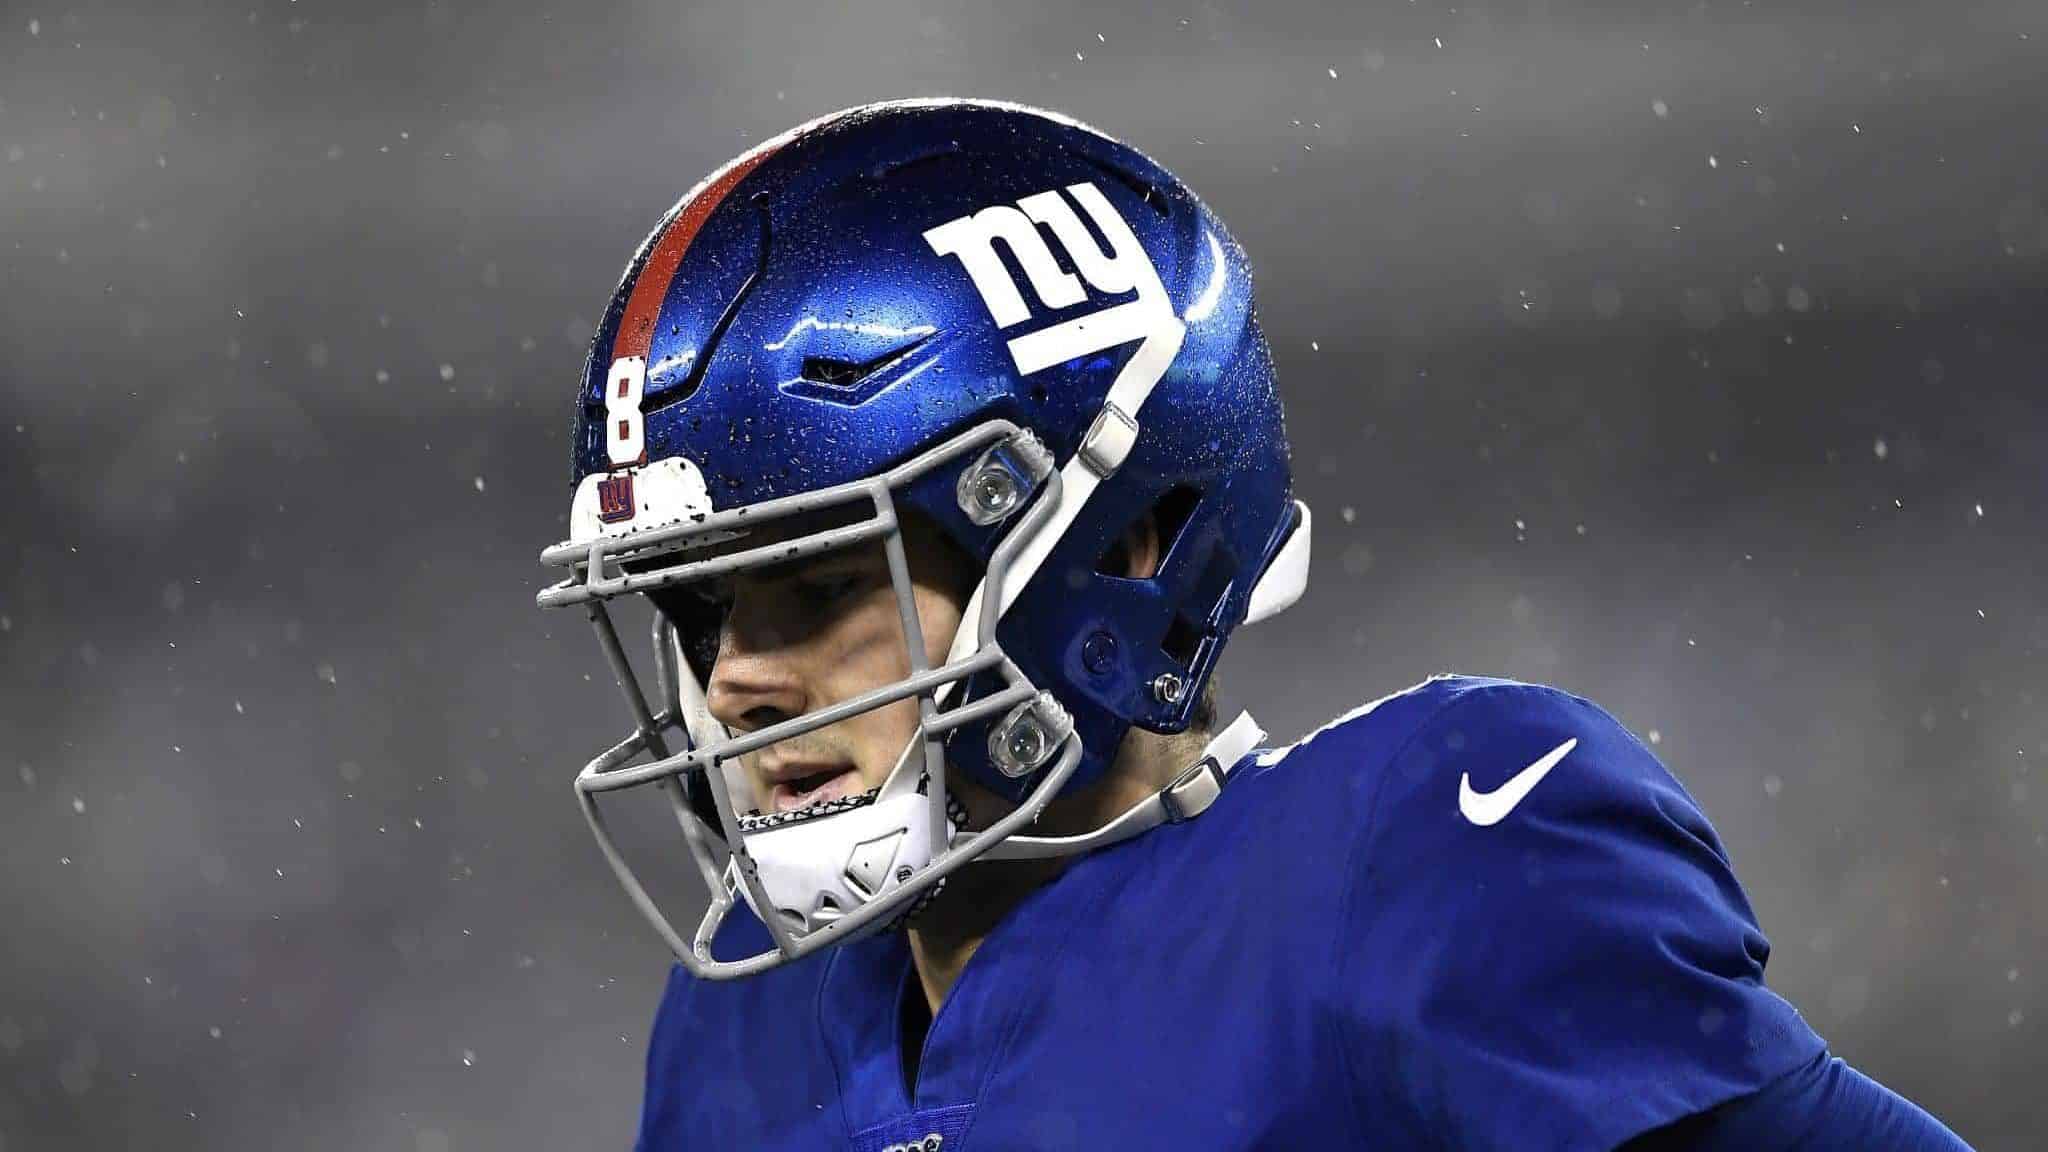 EAST RUTHERFORD, NEW JERSEY - DECEMBER 29: Daniel Jones #8 of the New York Giants reacts after losing the ball on a fumble against the Philadelphia Eagles during the fourth quarter in the game at MetLife Stadium on December 29, 2019 in East Rutherford, New Jersey.